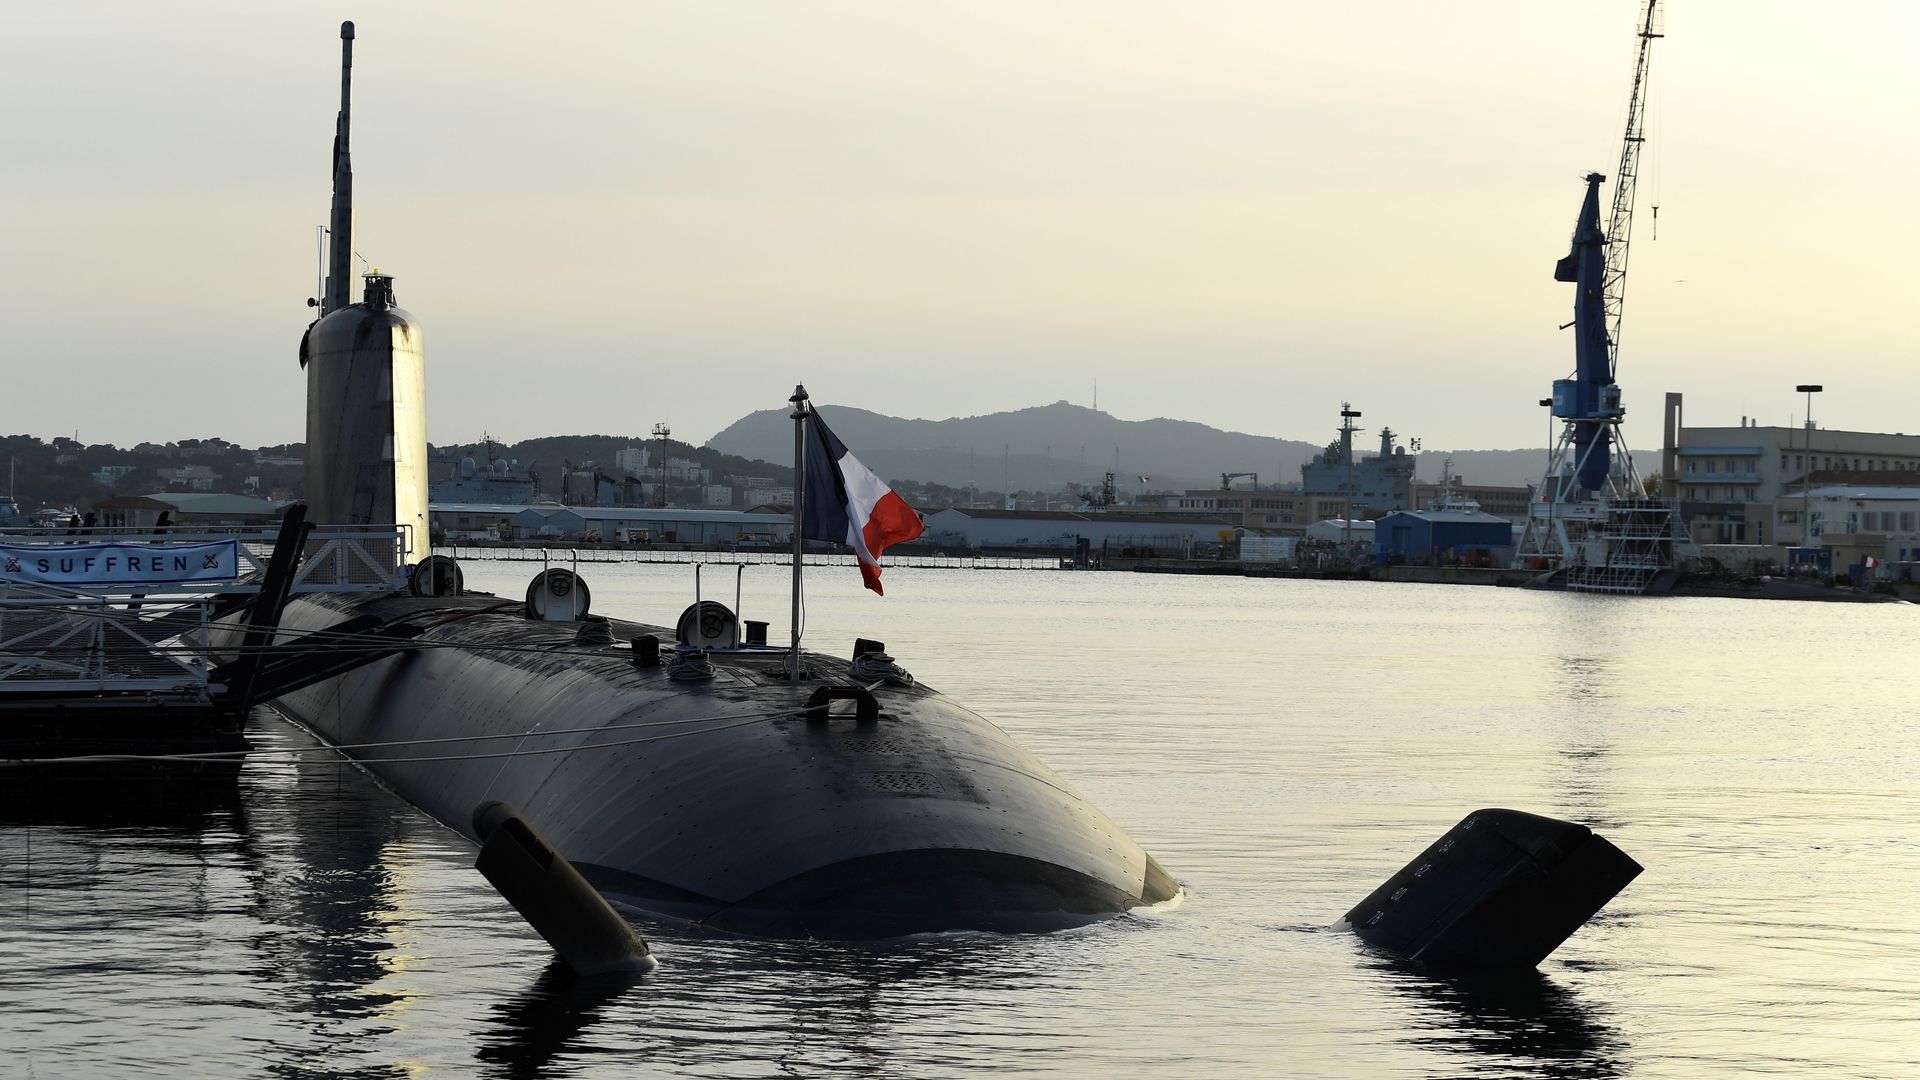 A French Barracuda class nuclear attack submarine docked in Toulon's harbor in November 2020.